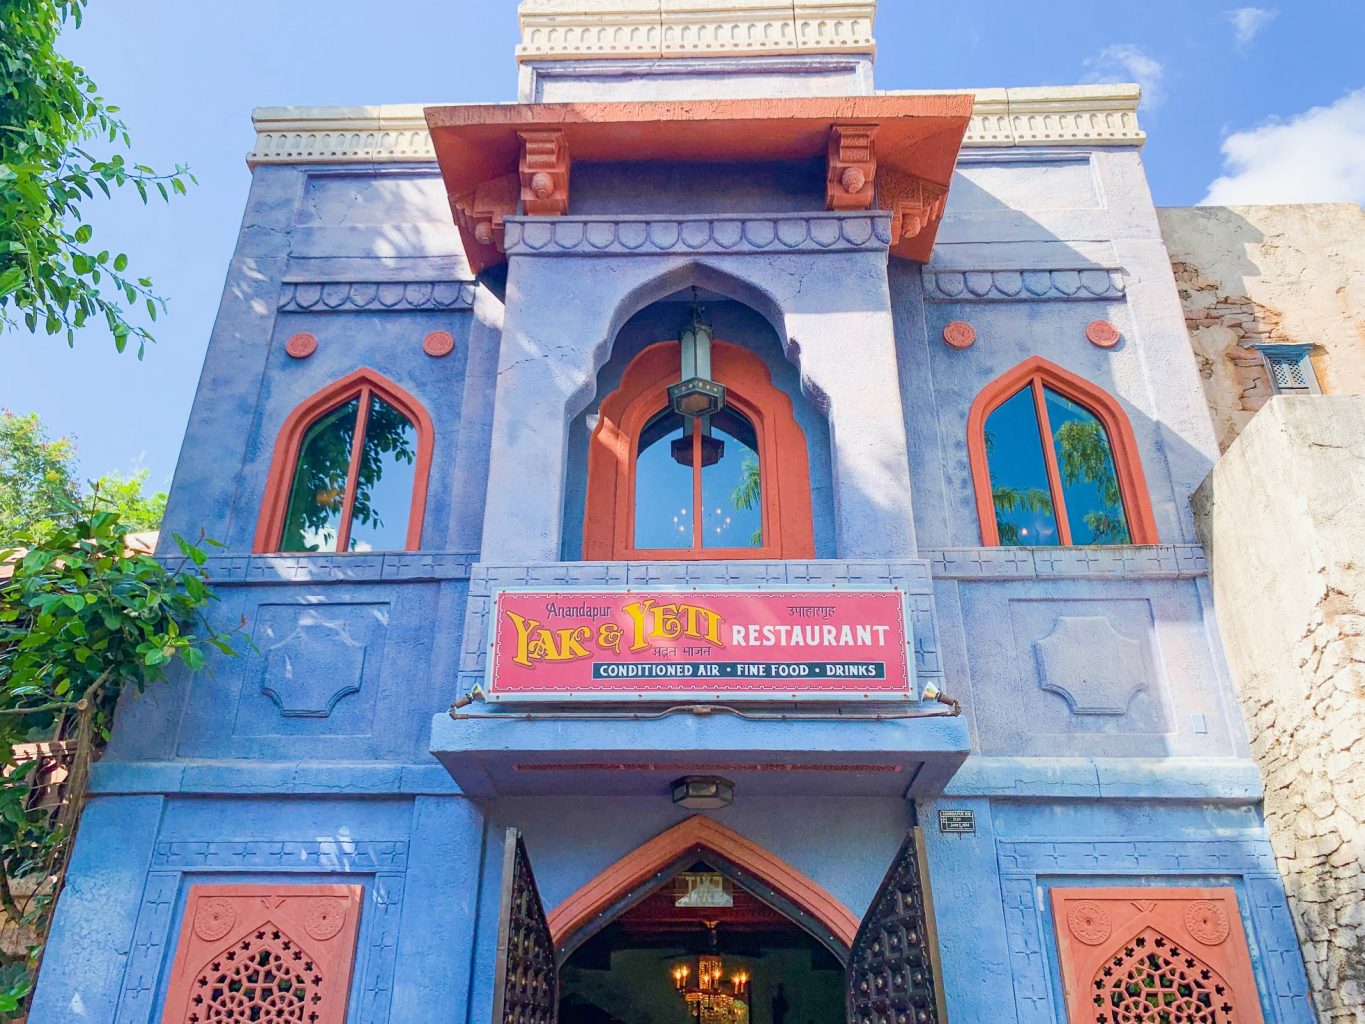 The Asian inspired blue and red exterior of the Yak and Yeti restaurant is the entrance to one of the best Animal Kingdom restaurants.